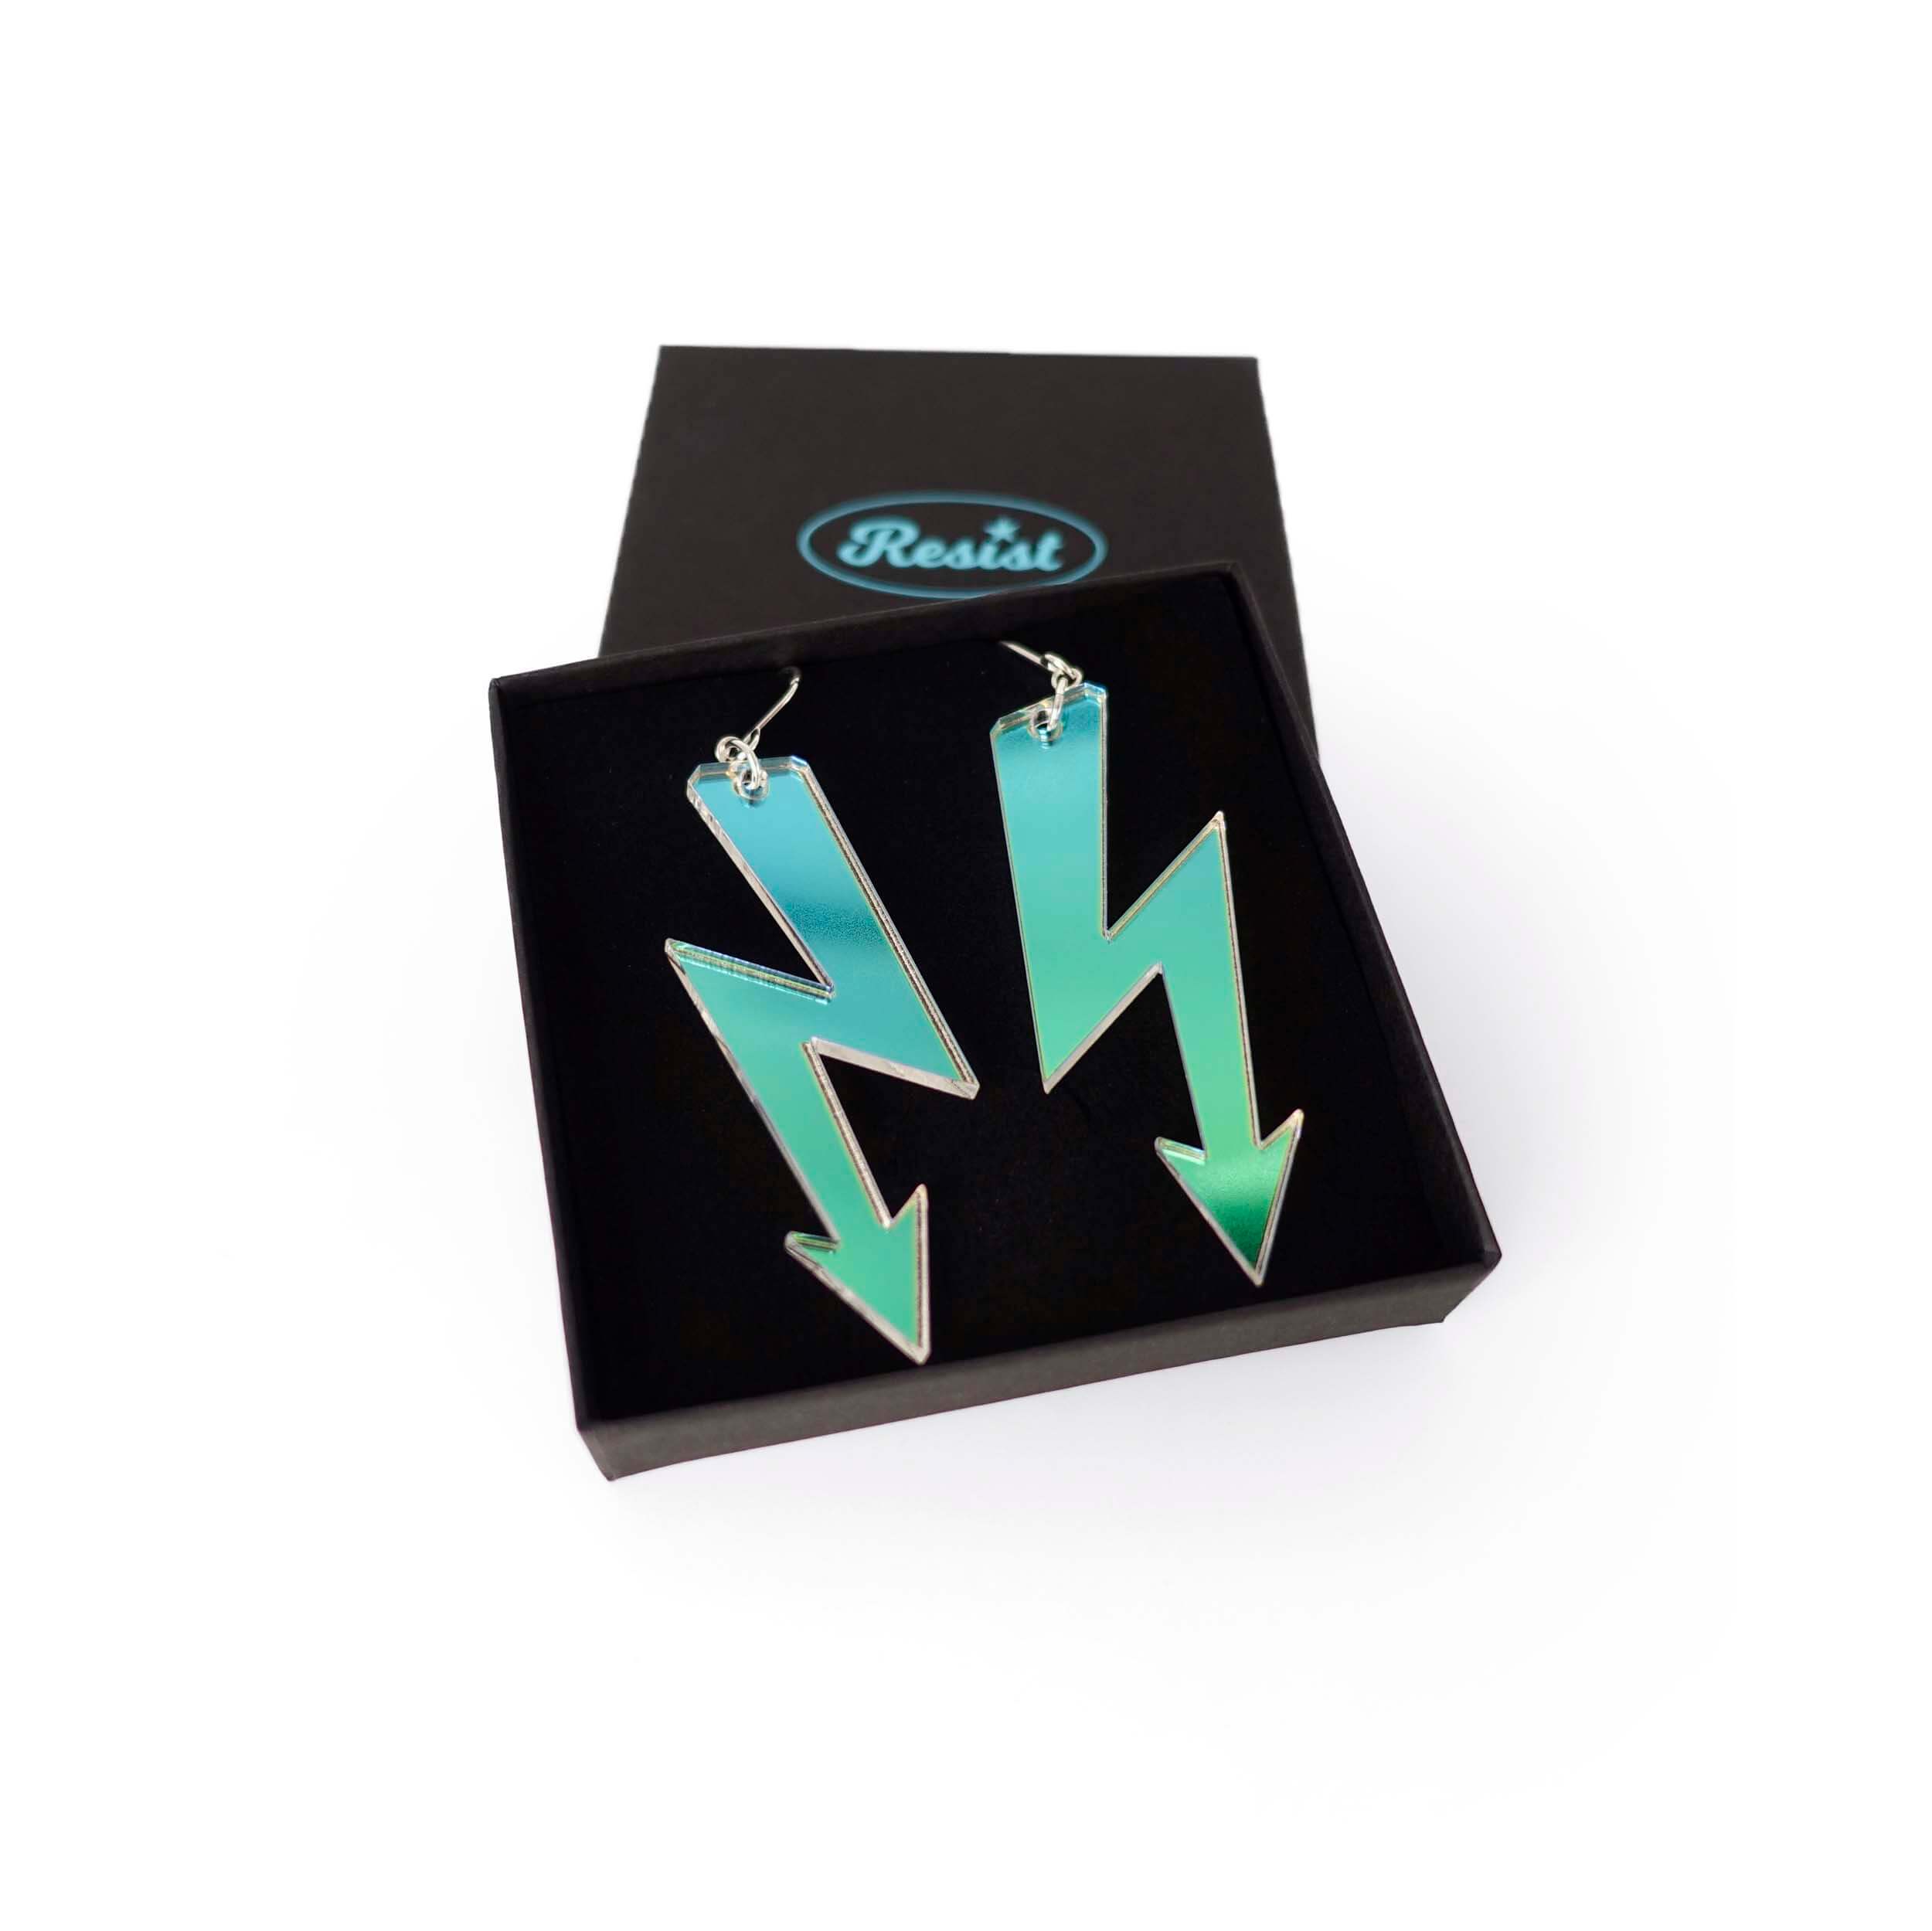 Iridescent high voltage earrings shown in a Wear and Resist gift box. 